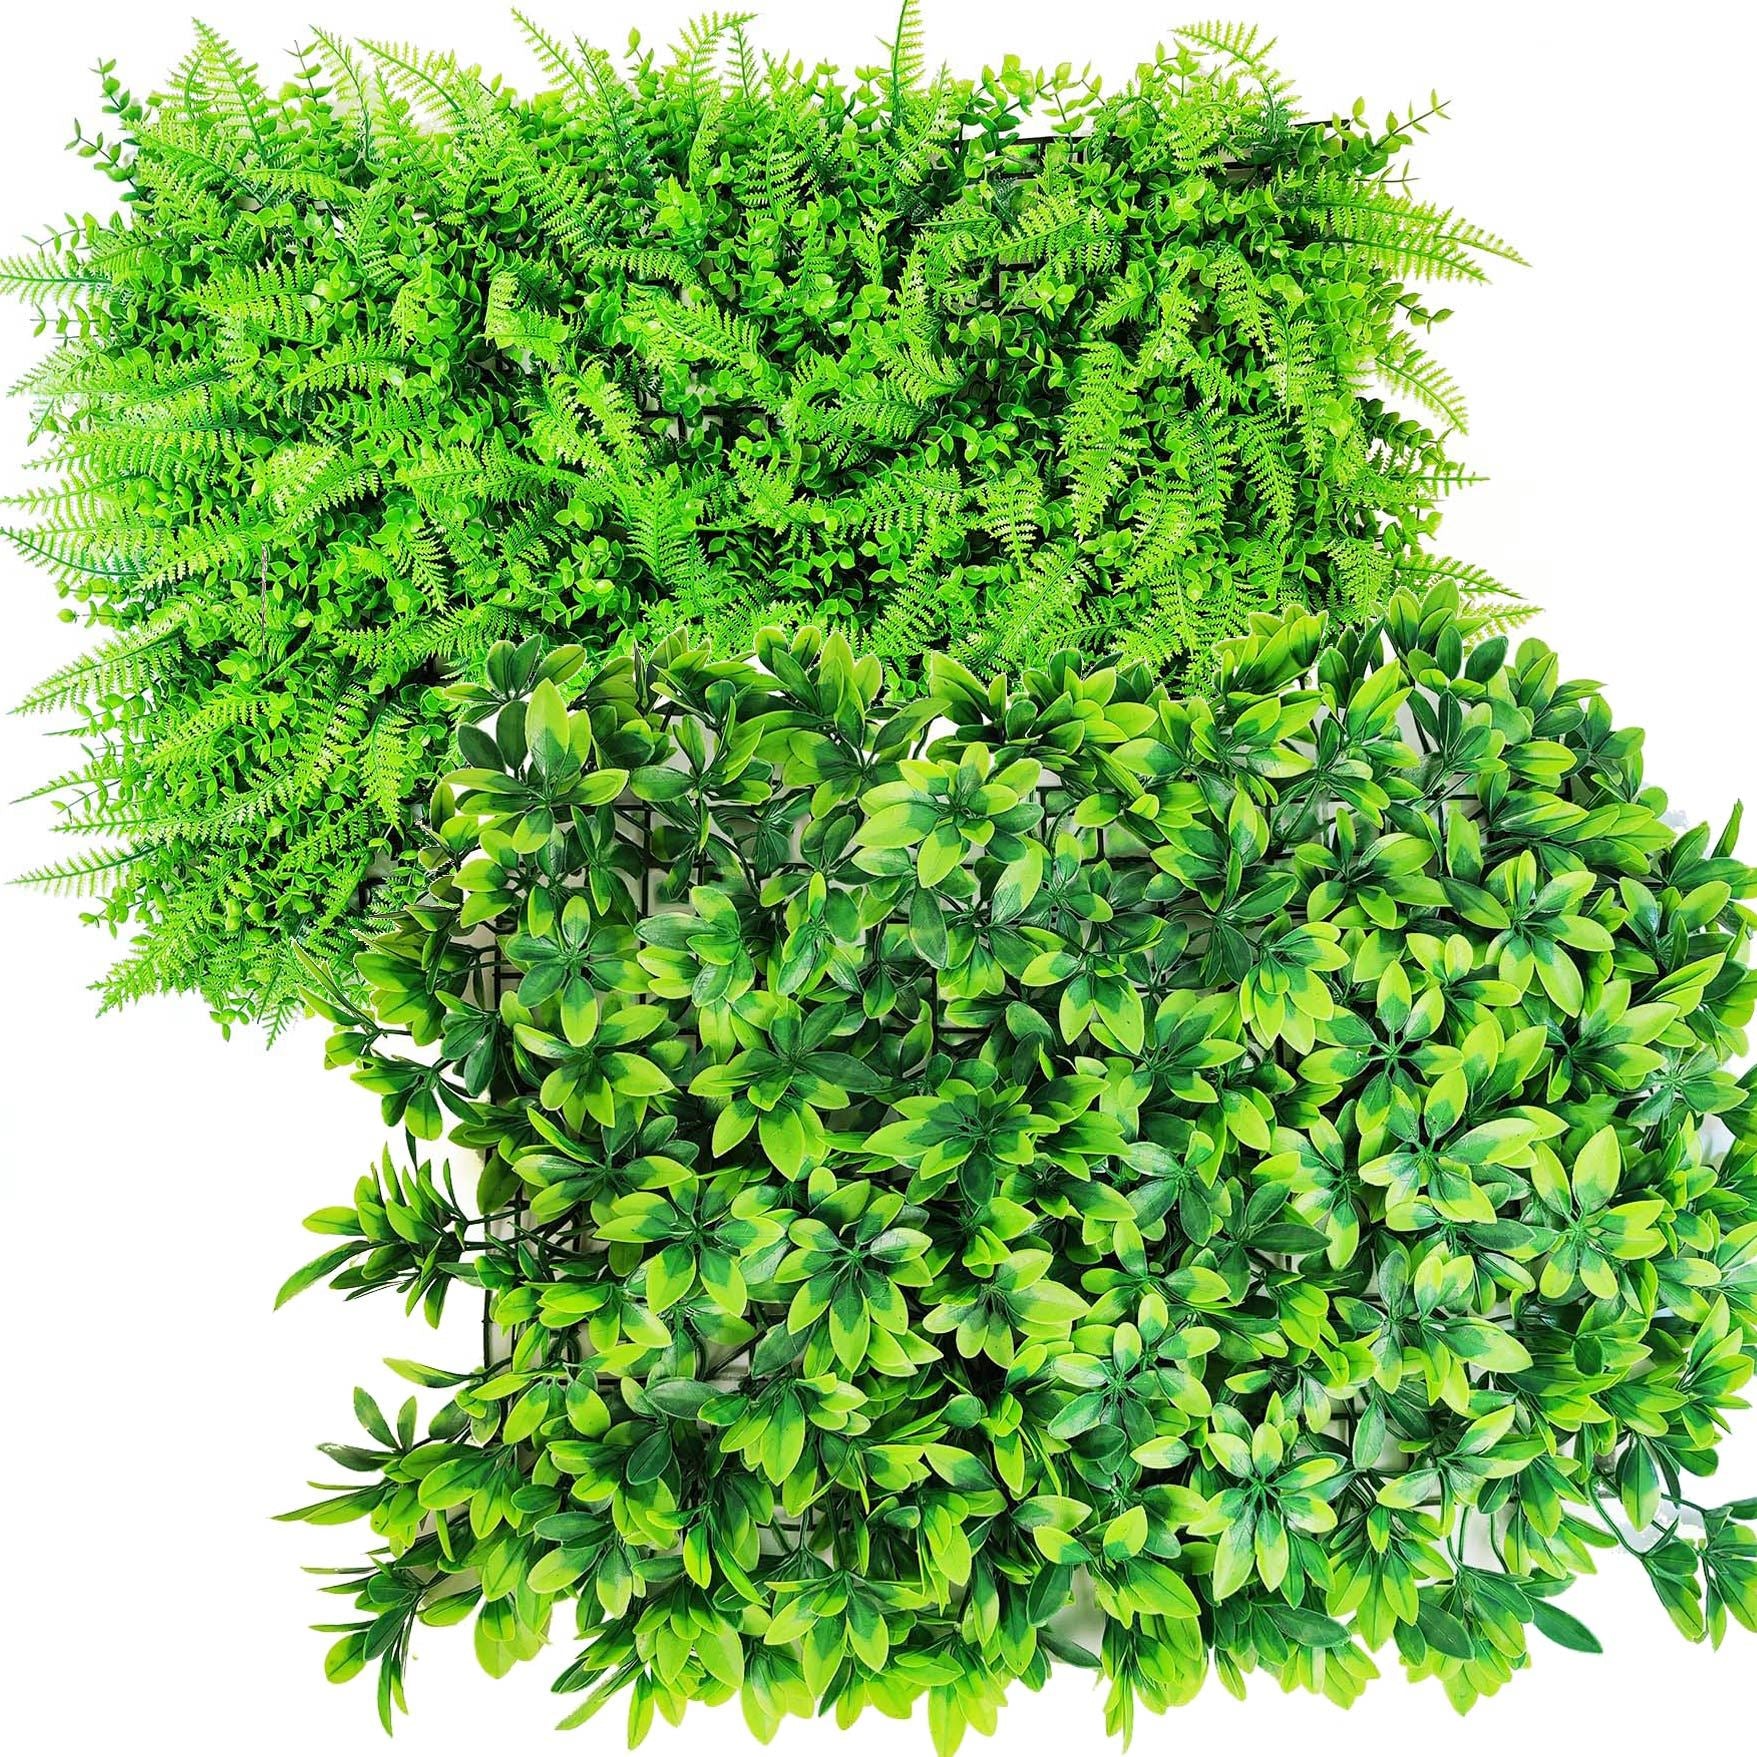 Extra Thick Artificial Foliage Wall Panels